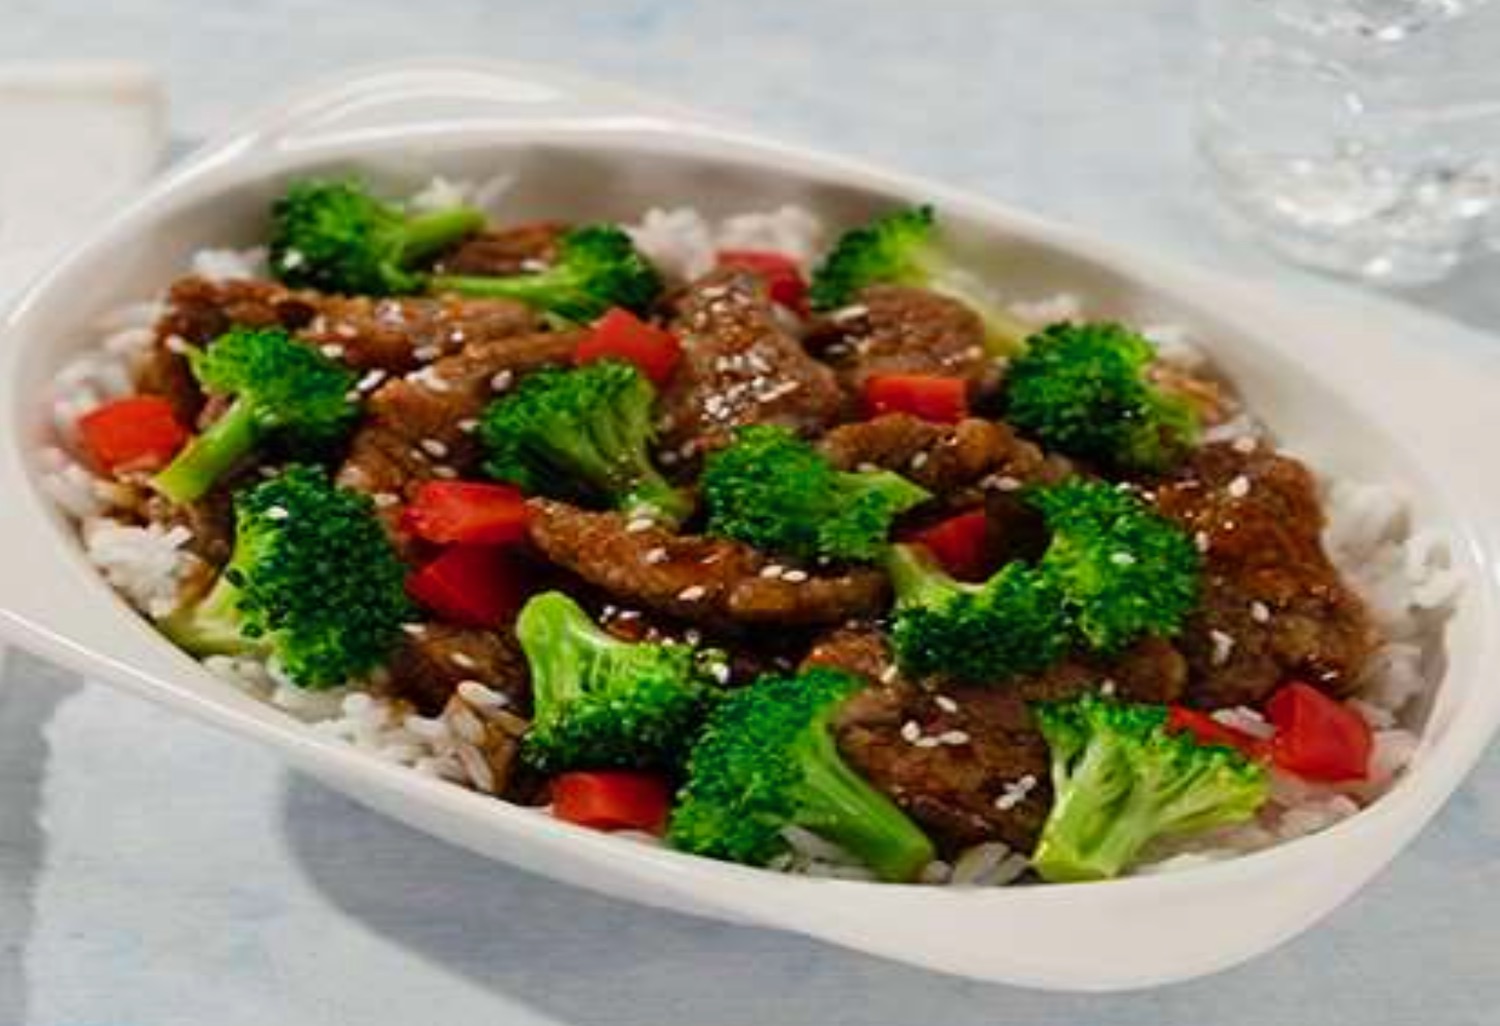 a plate of food with meat and broccoli